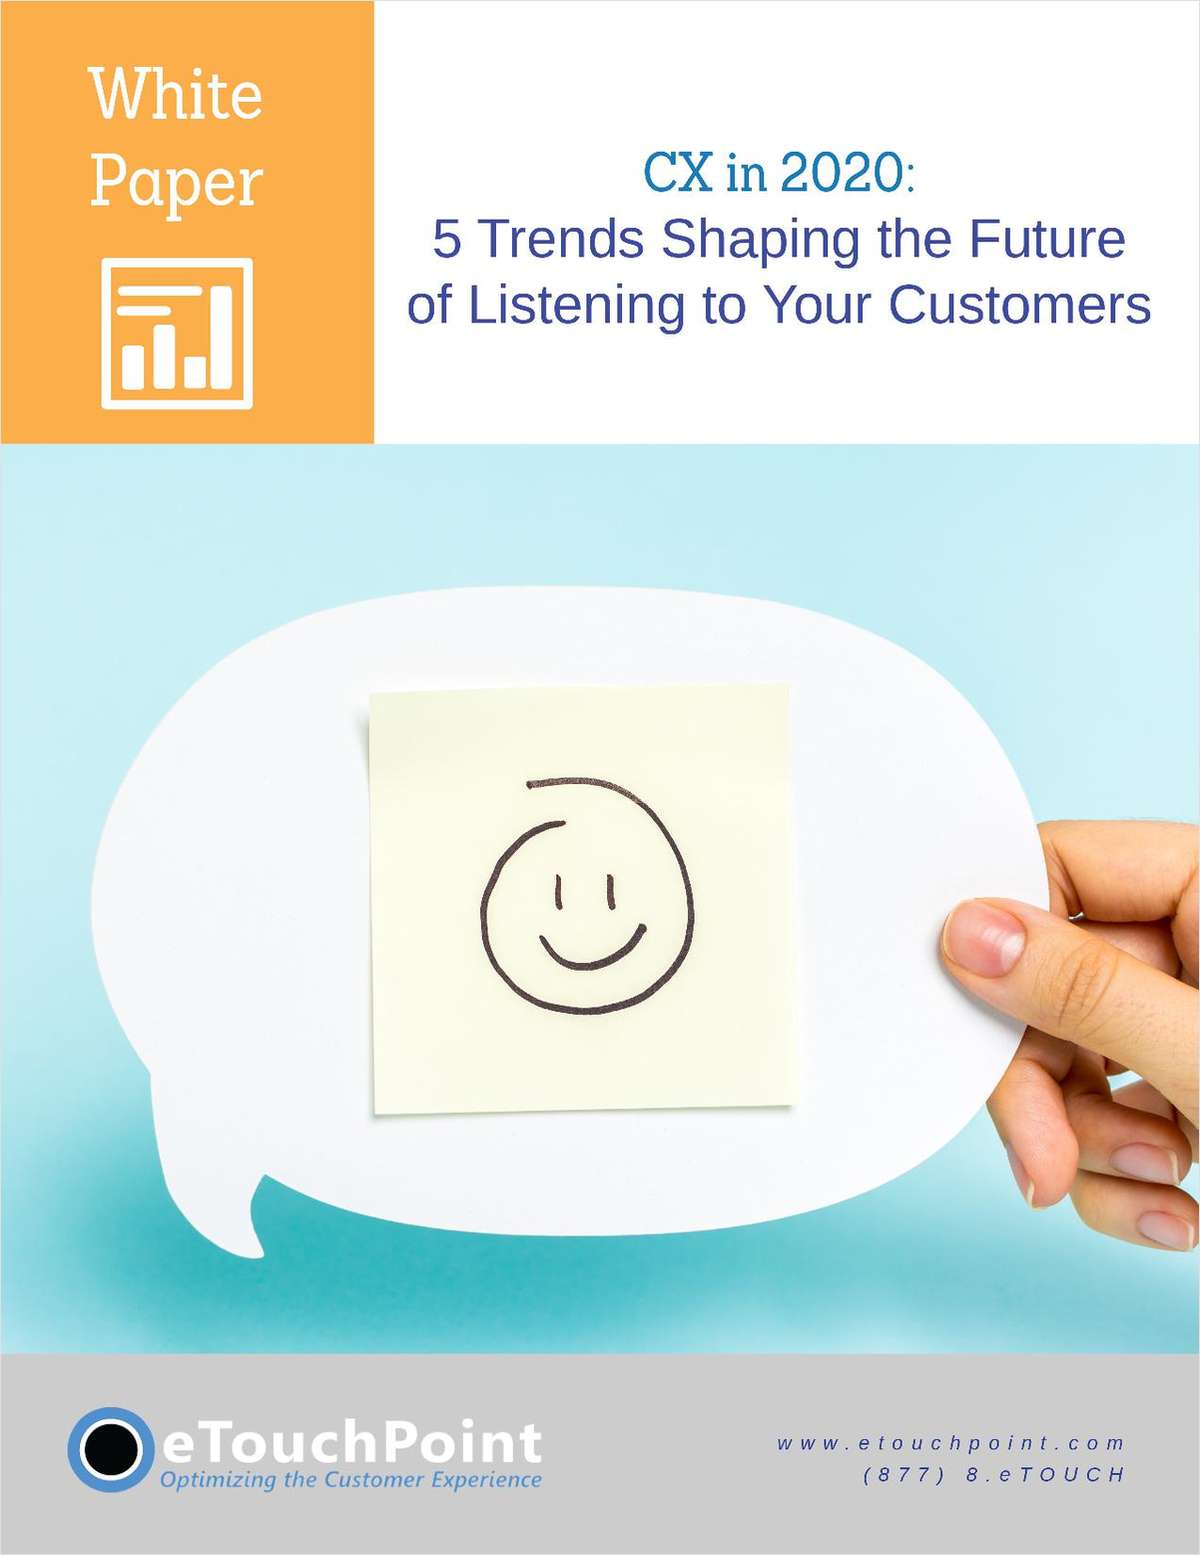 CX in 2020: 5 Trends Shaping the Future of Listening to Your Customers